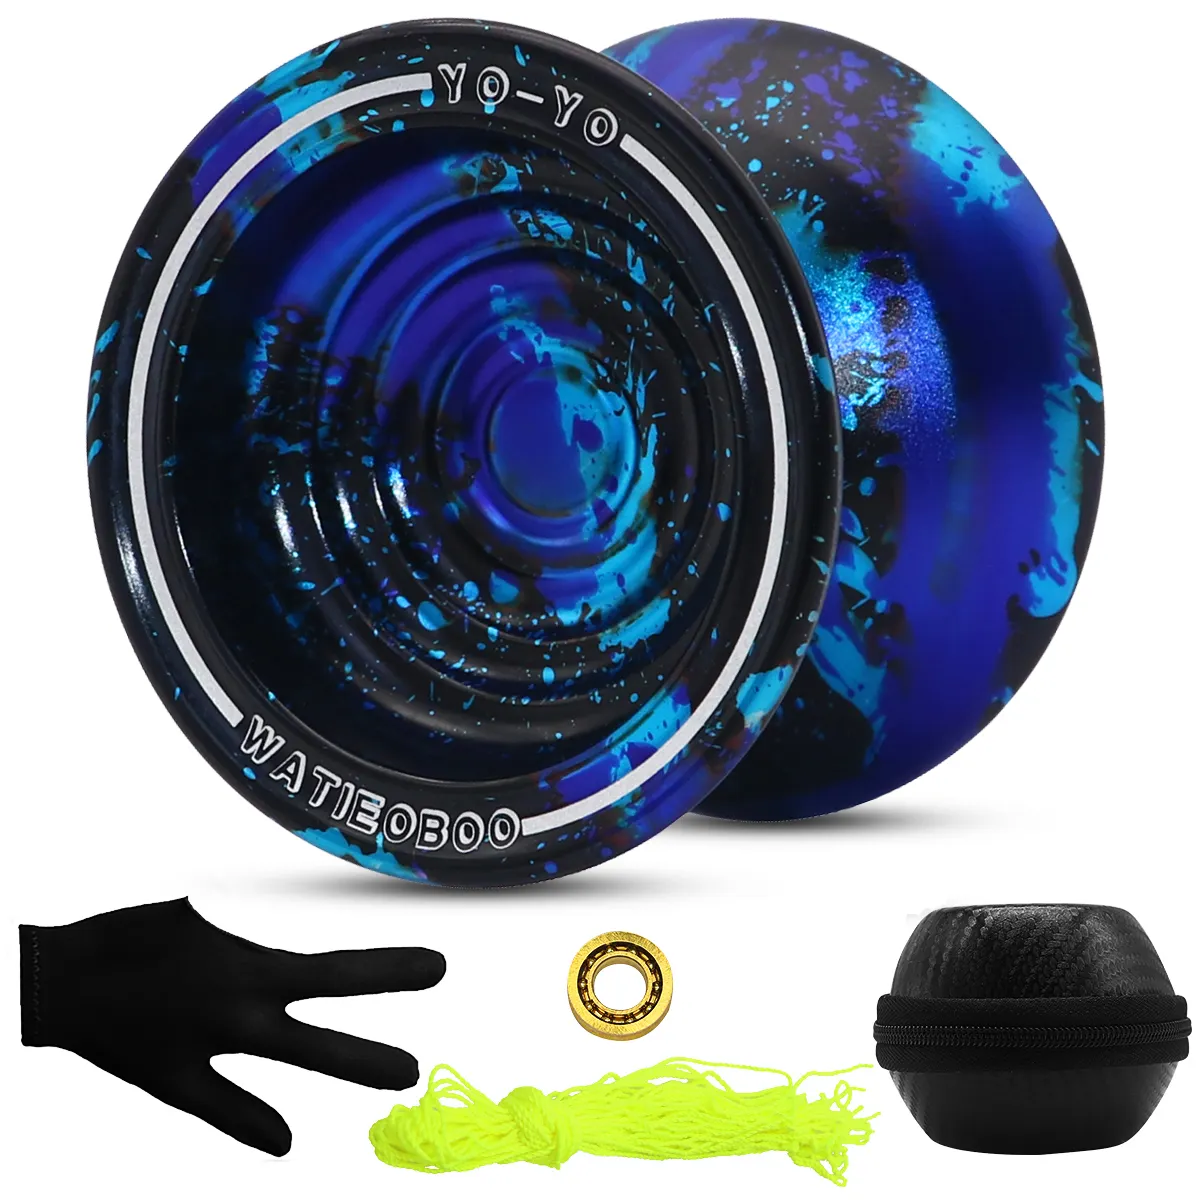 Metal Aluminum Professional Responsive Yoyo for Kids Beginner with Unresponsive Ball Bearing for Advanced Yoyo Players